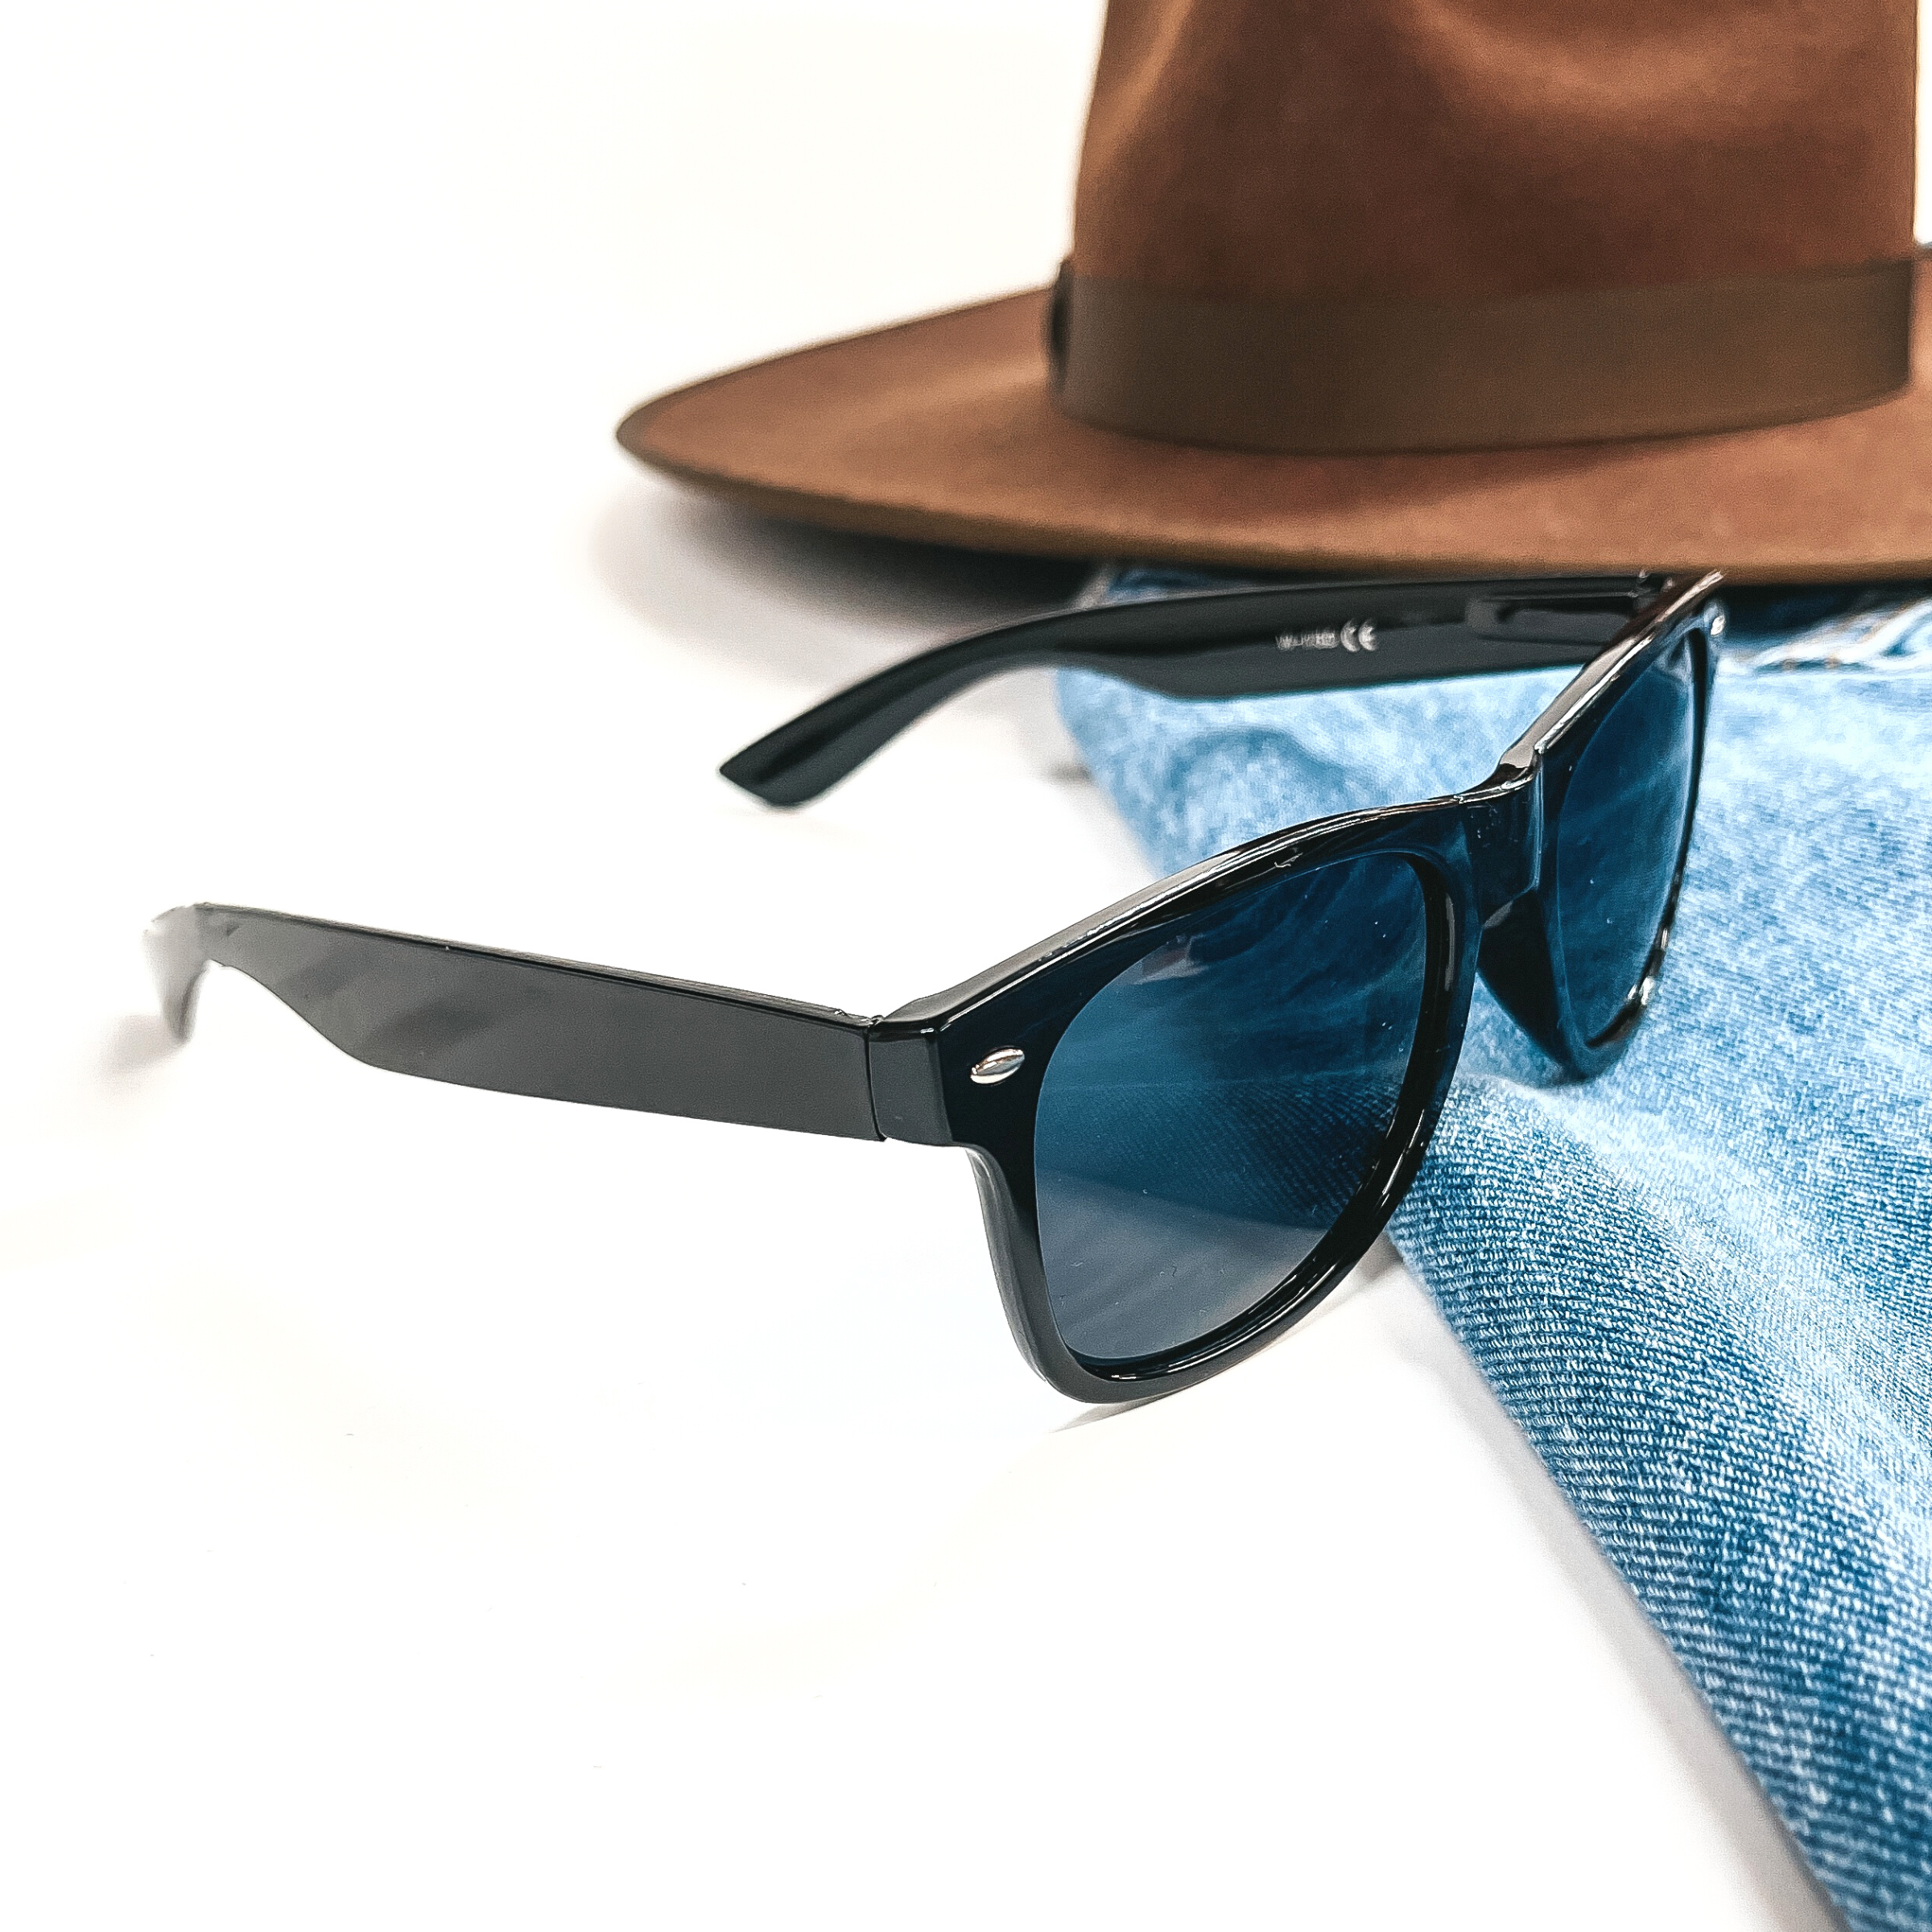 This is a black pair of sunglasses, the lenses are black/dark grey with silver  detailing in the side. These sunglasses are taken on a jean jacket sleeve with a  dark brown felt hat in the top as decor.